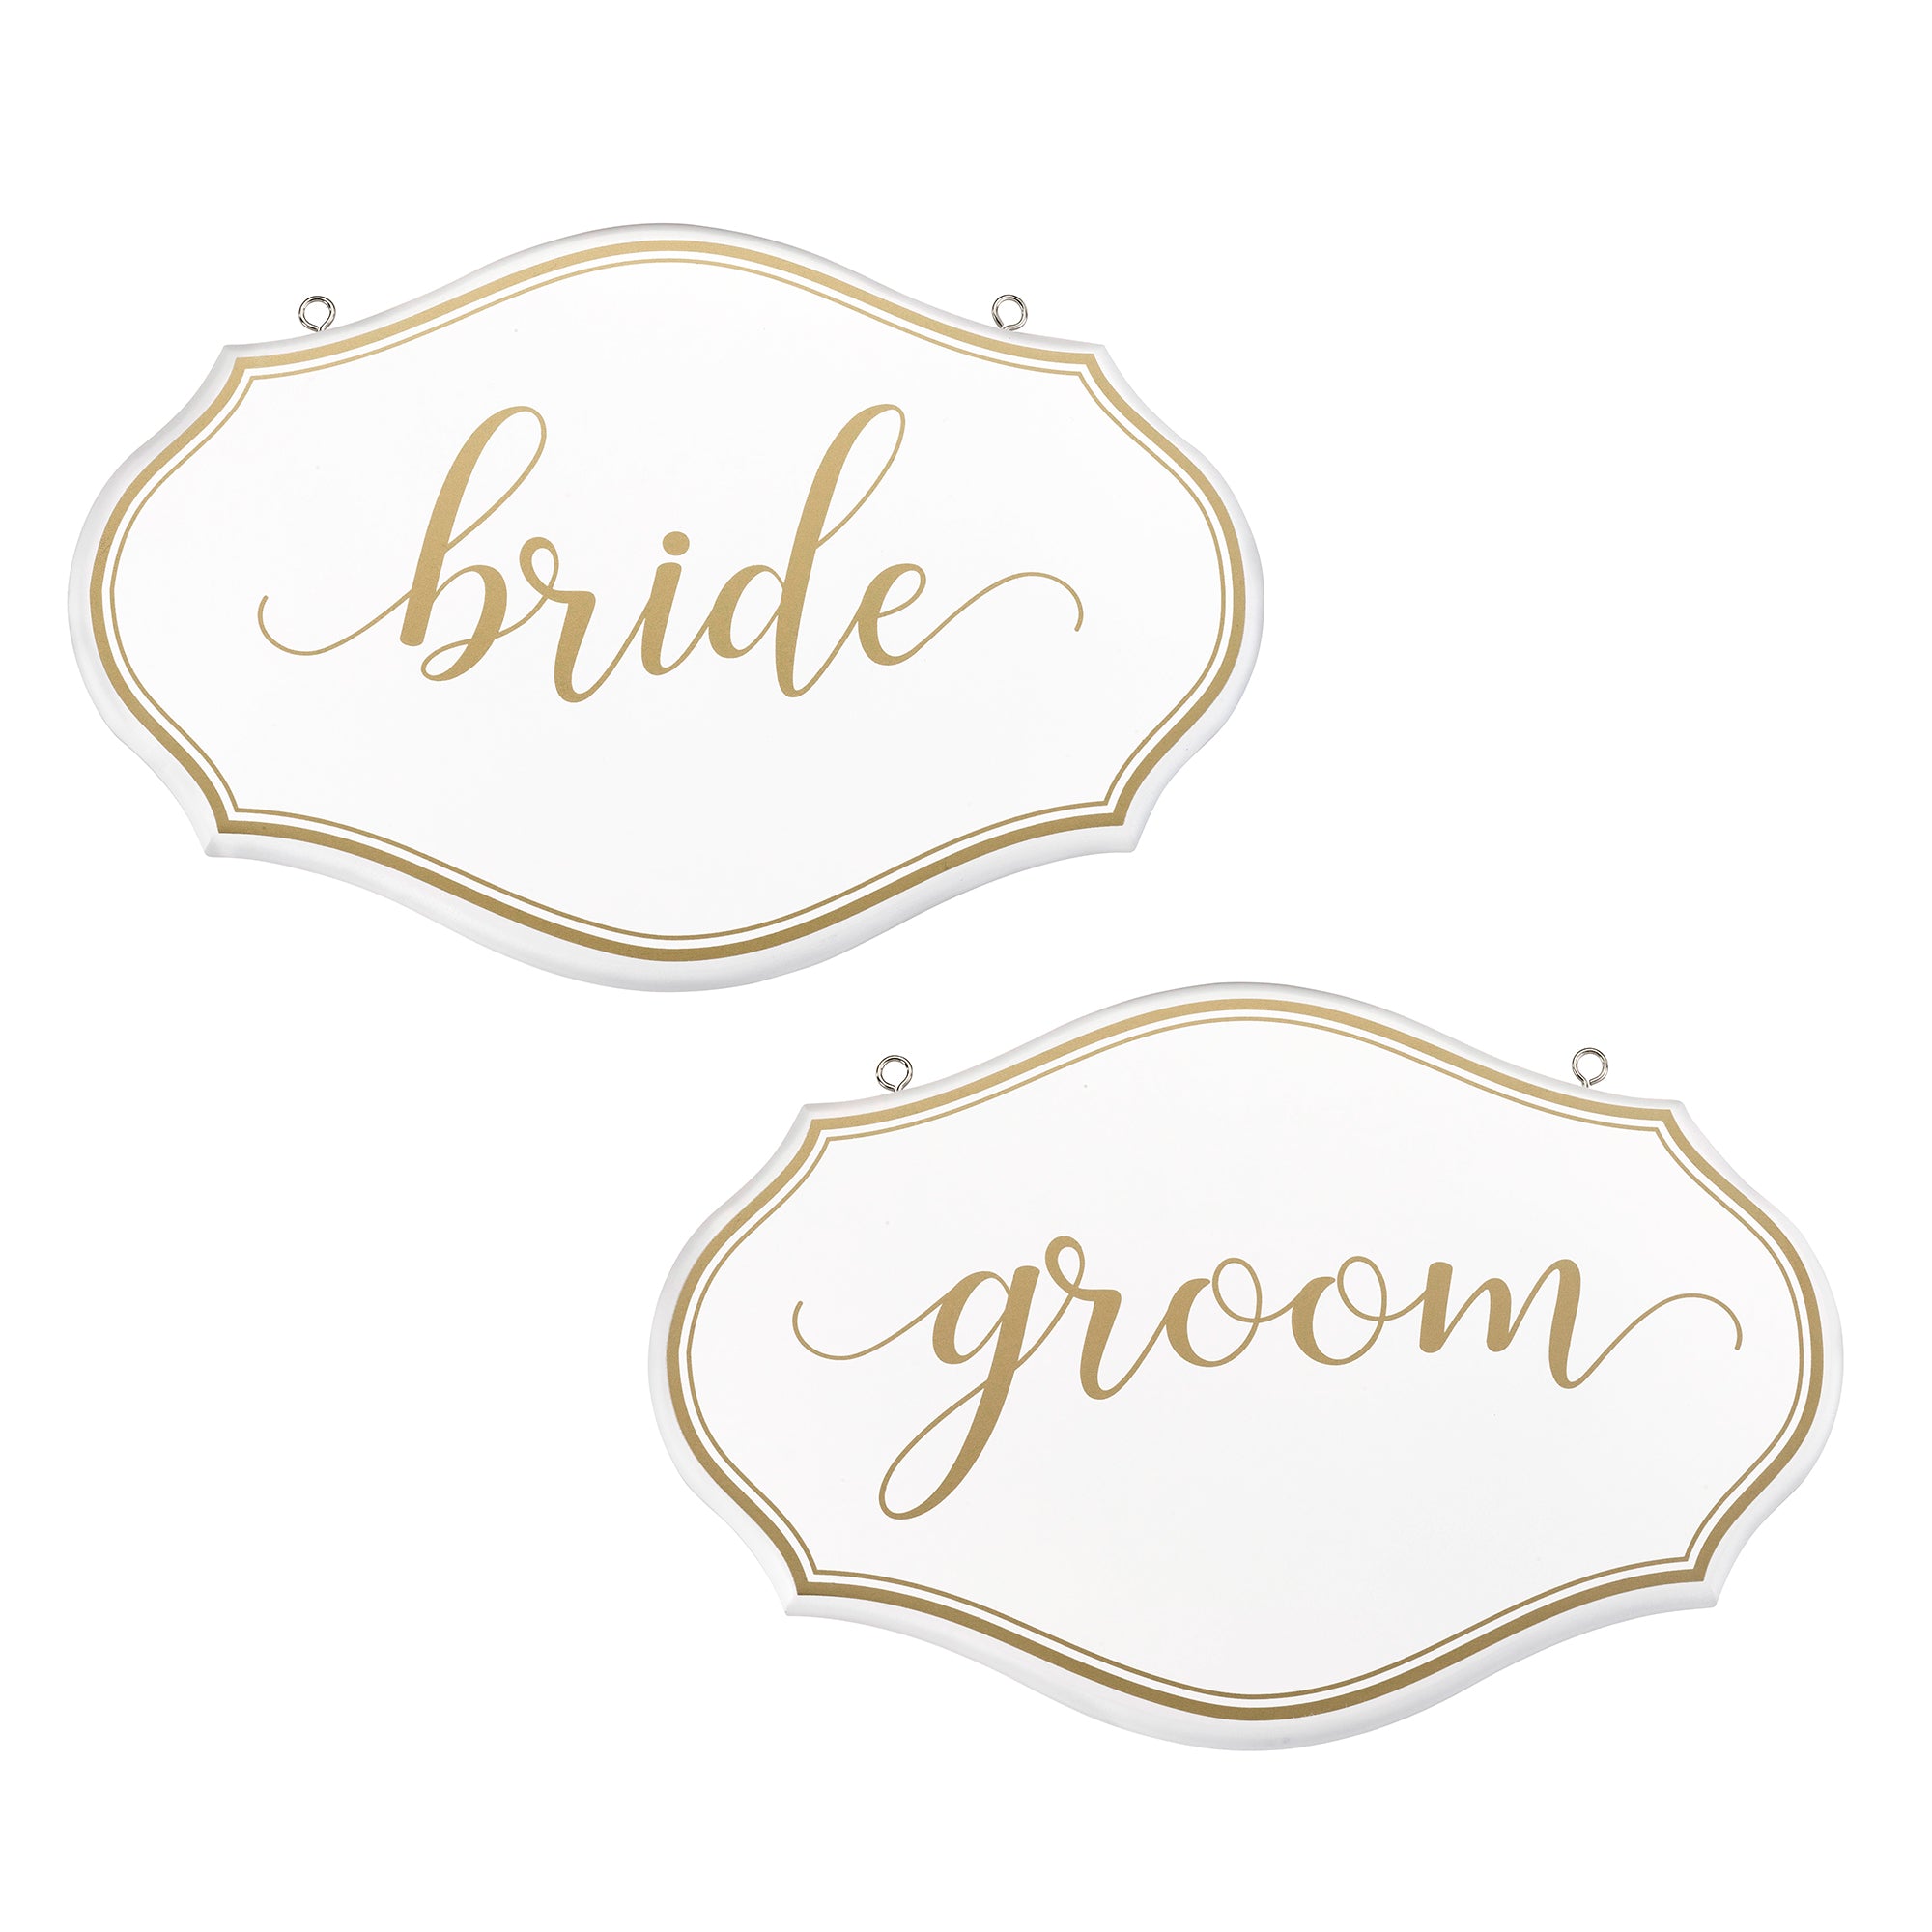 White and Gold Bride and Groom Chair Signs